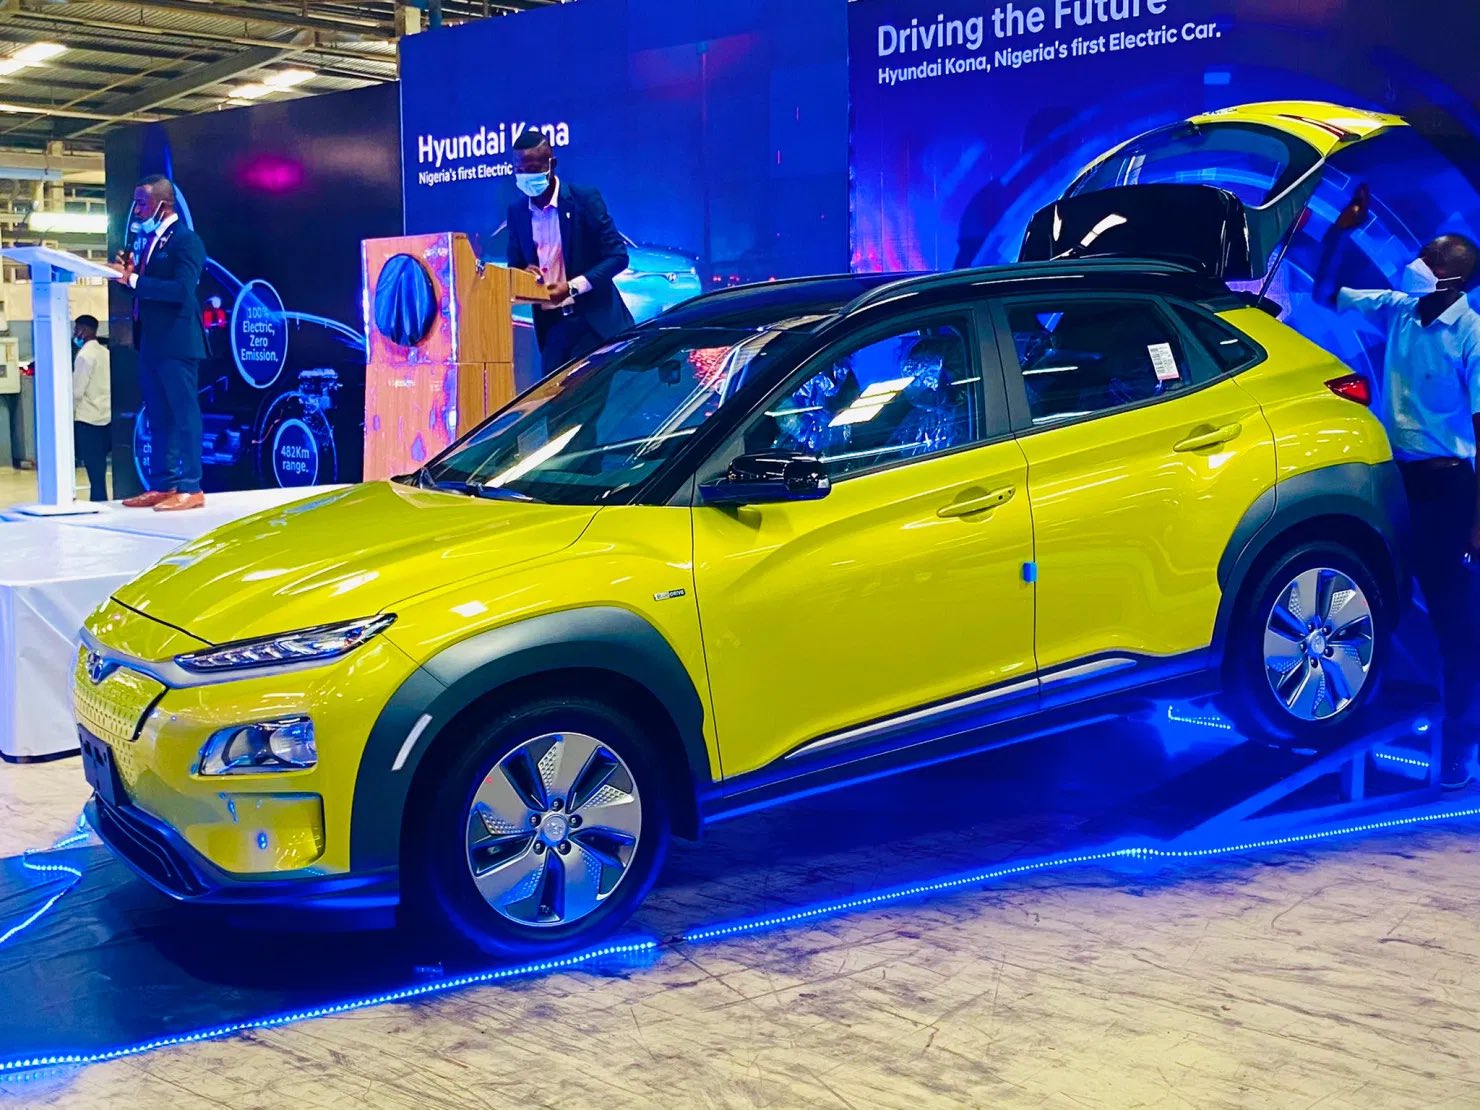 Hyundai Kona 2021 is Nigeria's first Electric Vehicle and Hong Guang Mini EVs sold over 56,000 in Jan/Feb